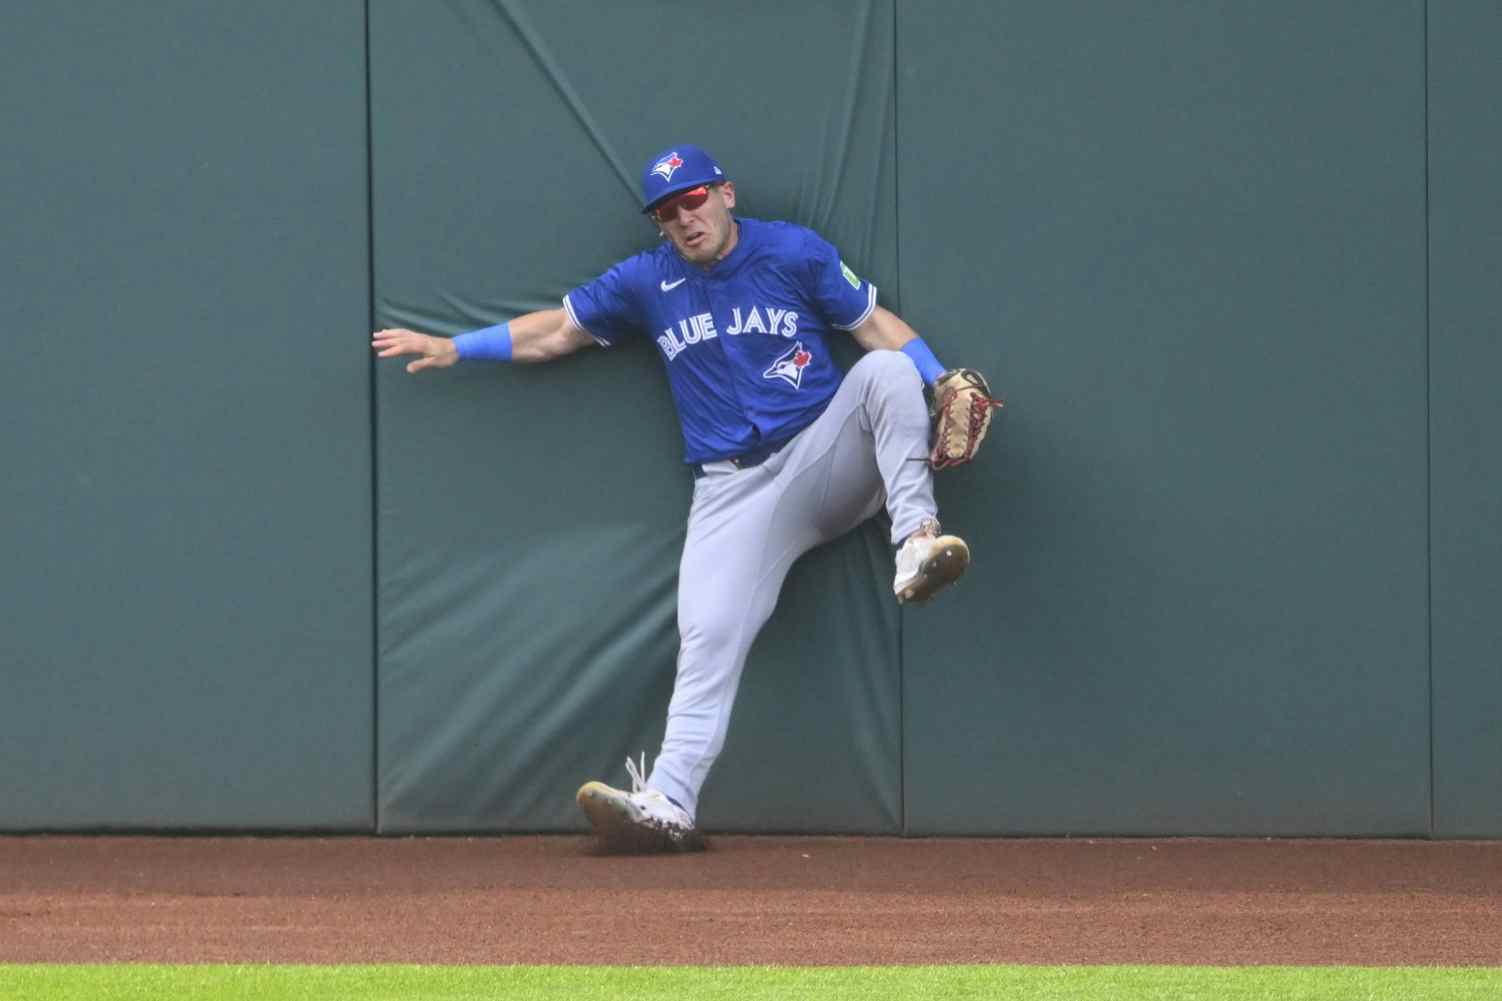 Toronto Blue Jays left fielder Daulton Varsho (25) hits the wall after making a catch on the warning track in the second inning against the Cleveland Guardians at Progressive Field.